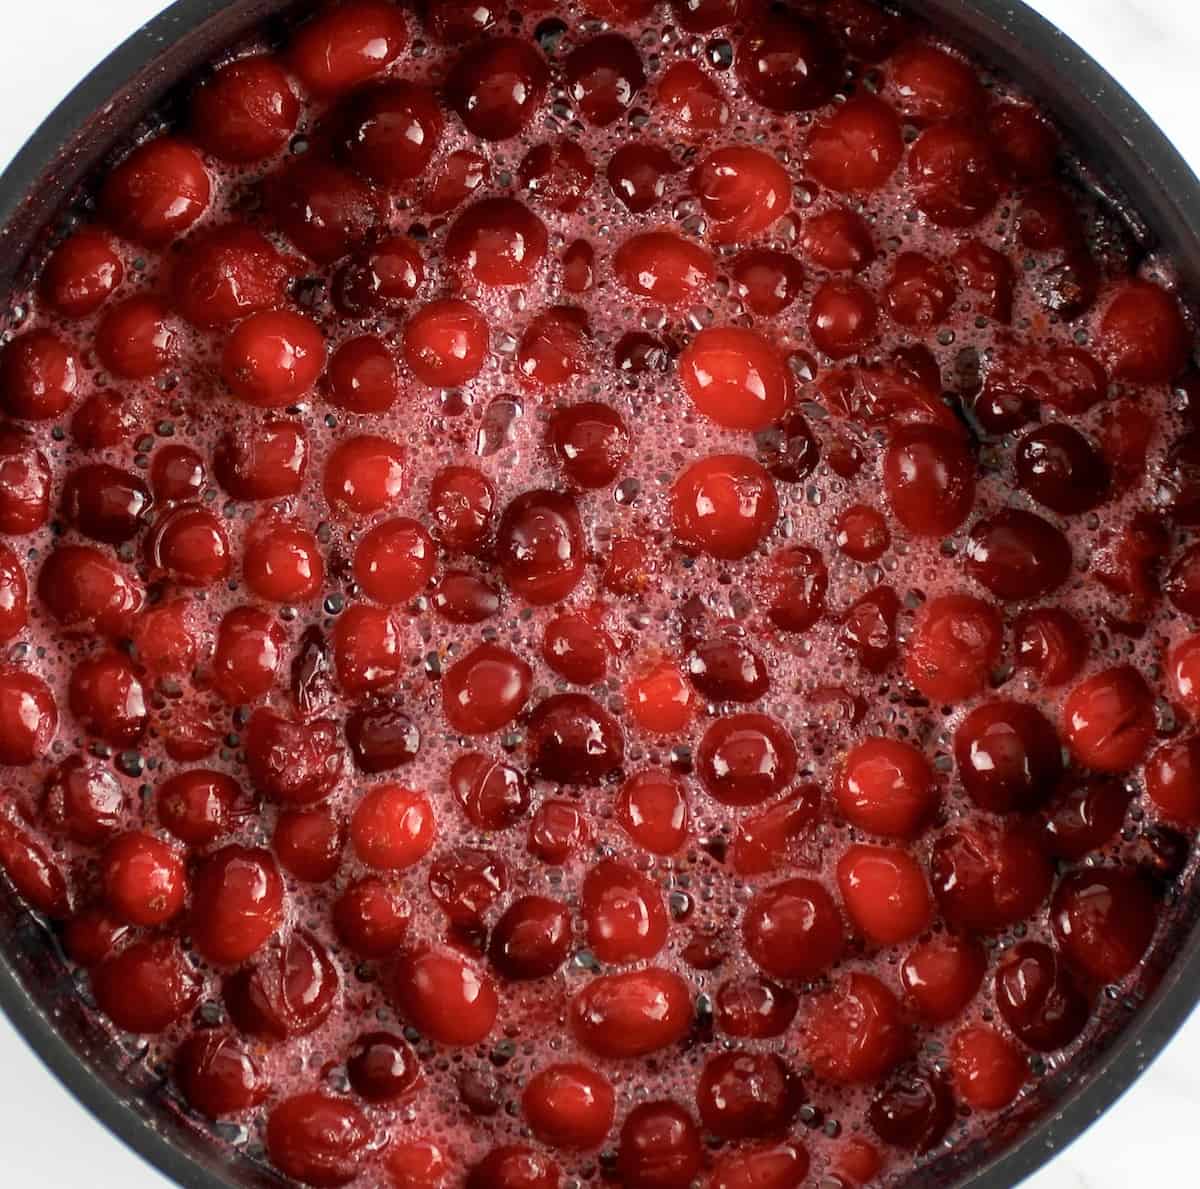 Keto Cranberry Sauce in saucepan partially cooked